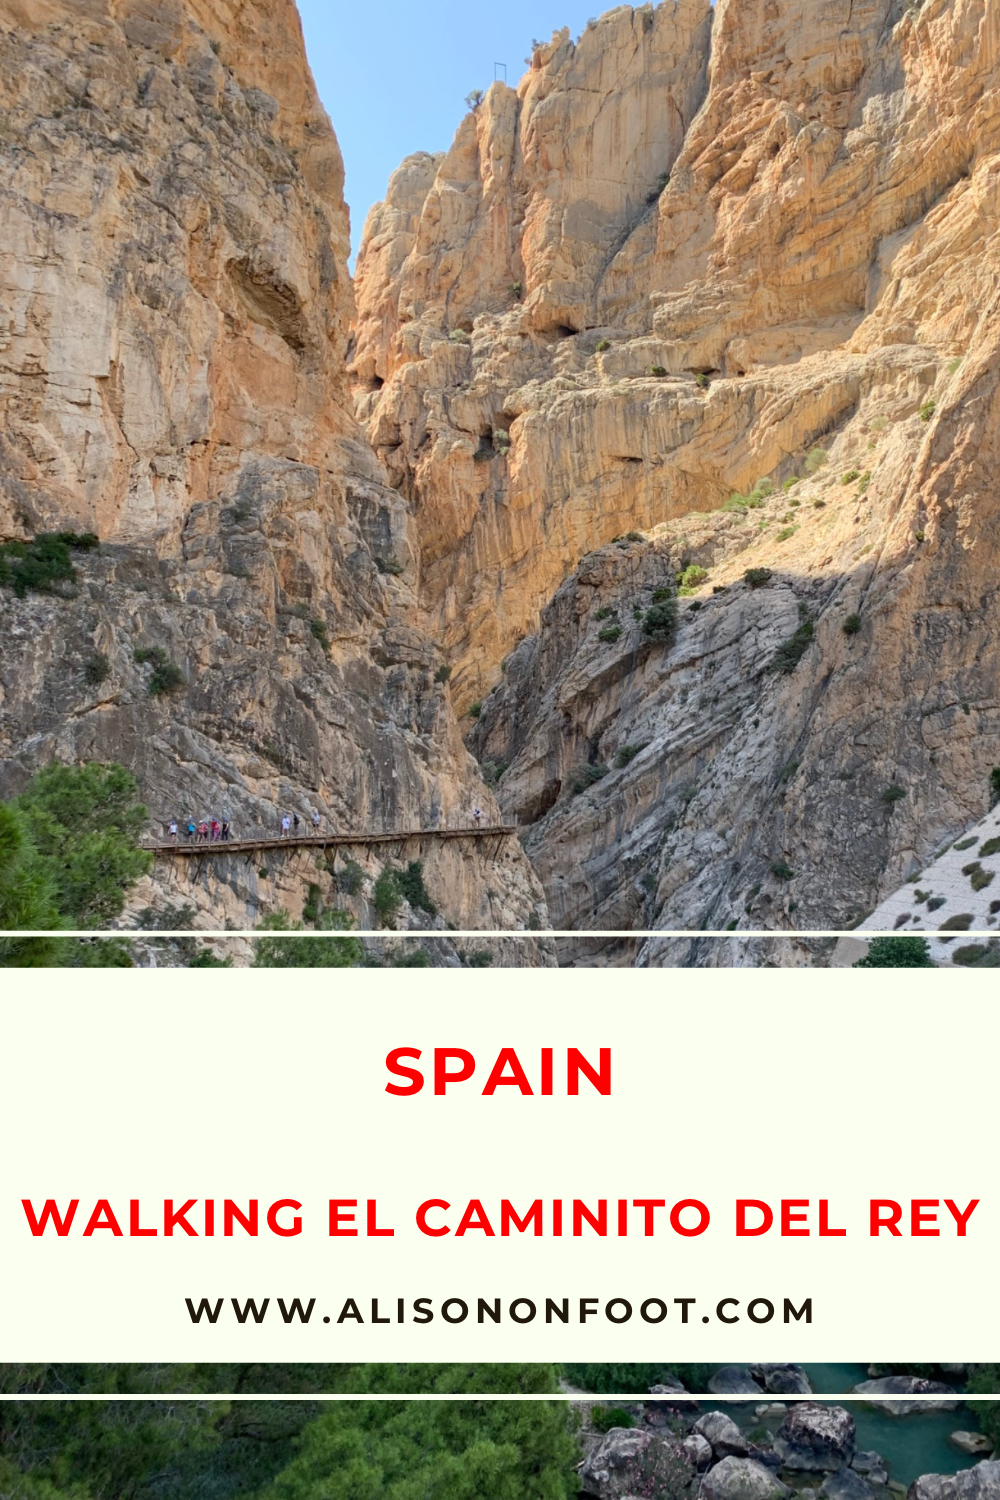 Everything you need to know about walking the Caminito del Rey in Malaga, Andalucia, Spain